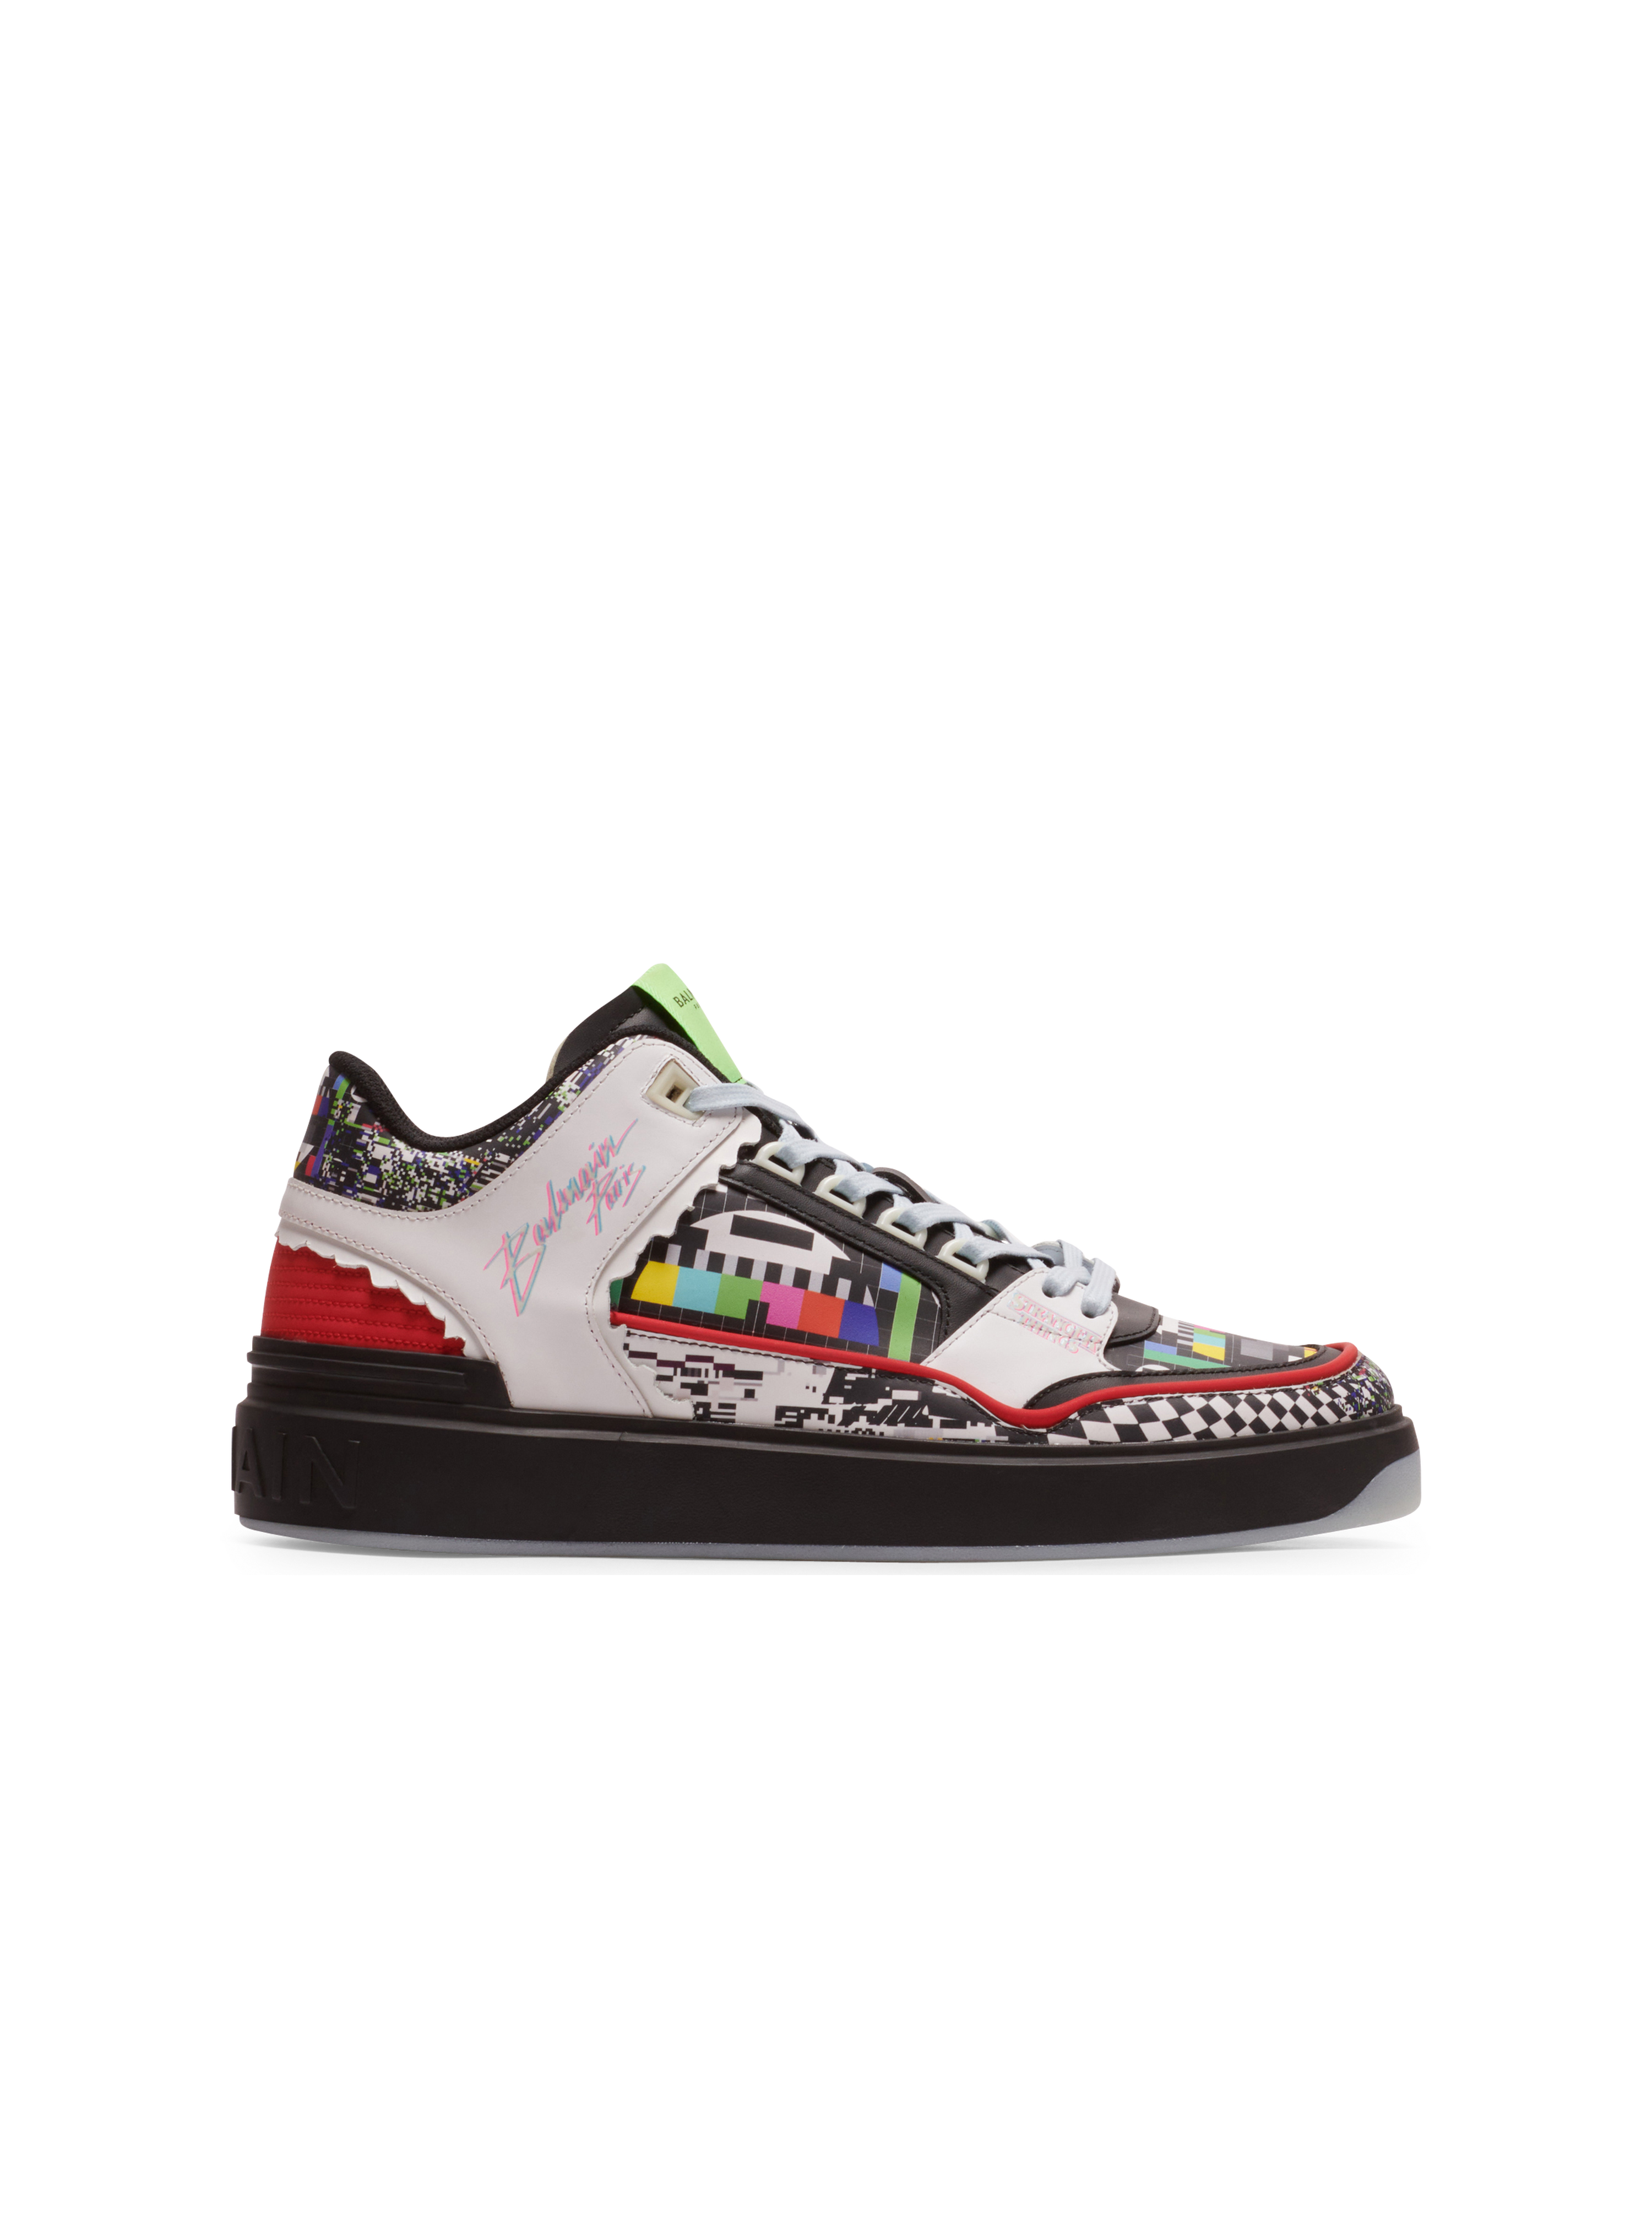 Balmain x Stranger Things - Basket B-low-top leather trainers, multicolor